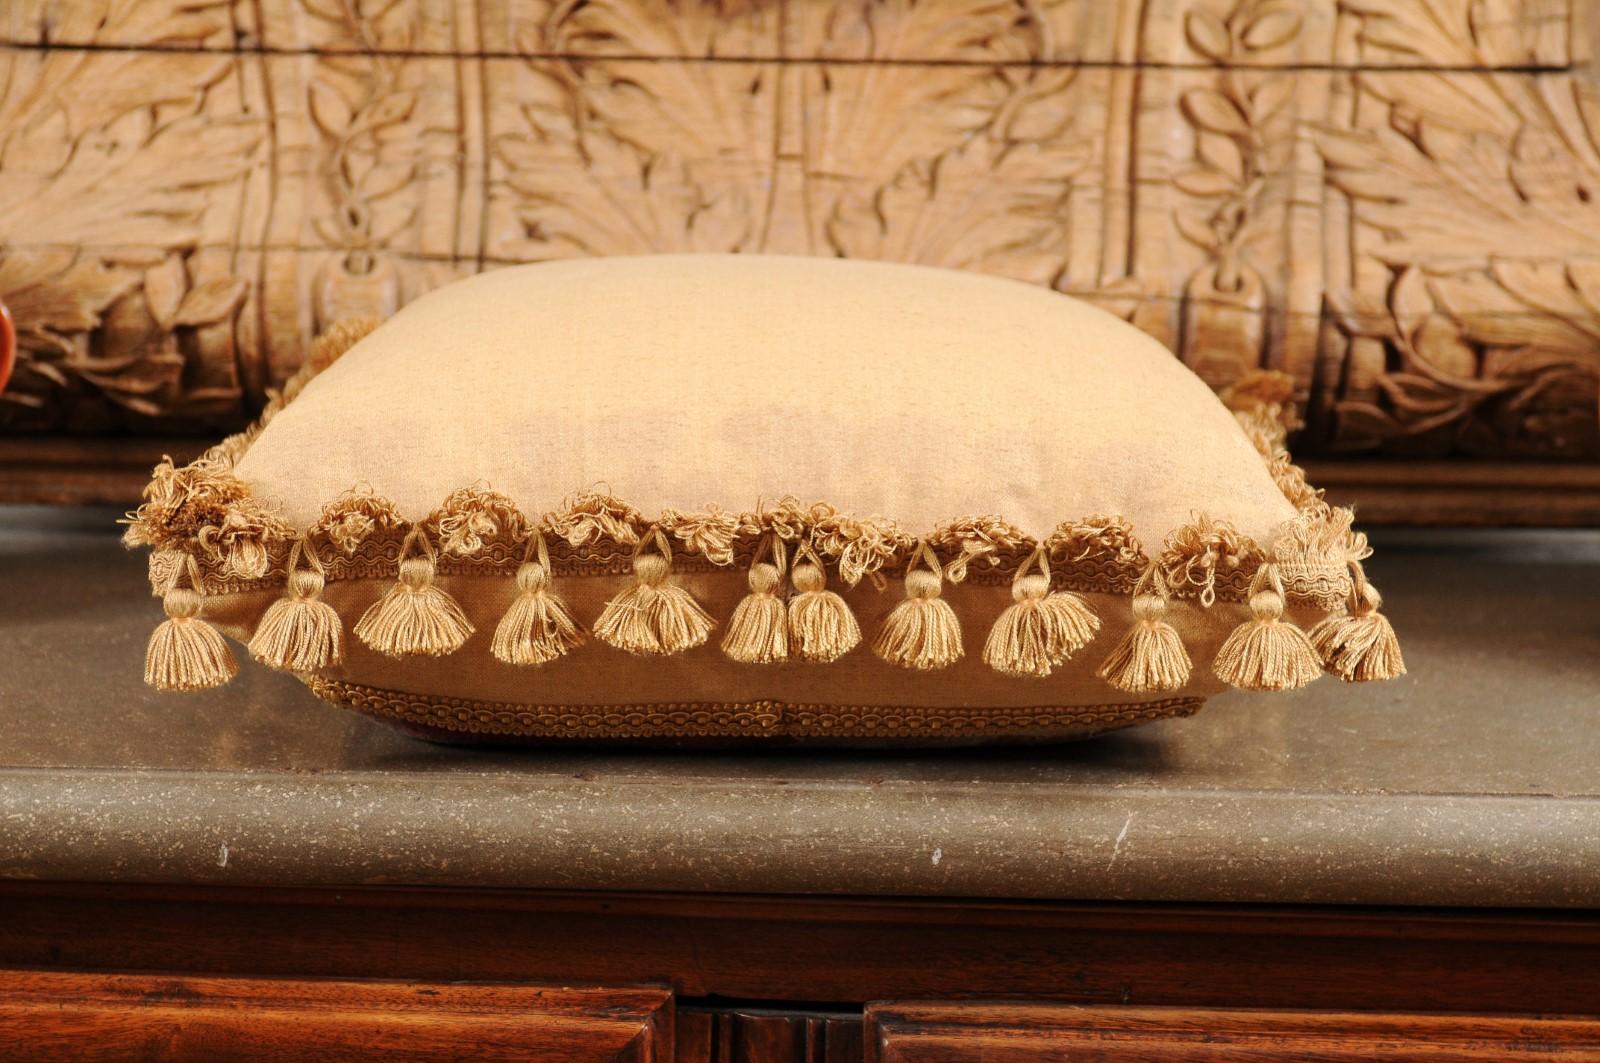 French 19th Century Aubusson Tapestry Pillow with Floral Decor and Tassels For Sale 8